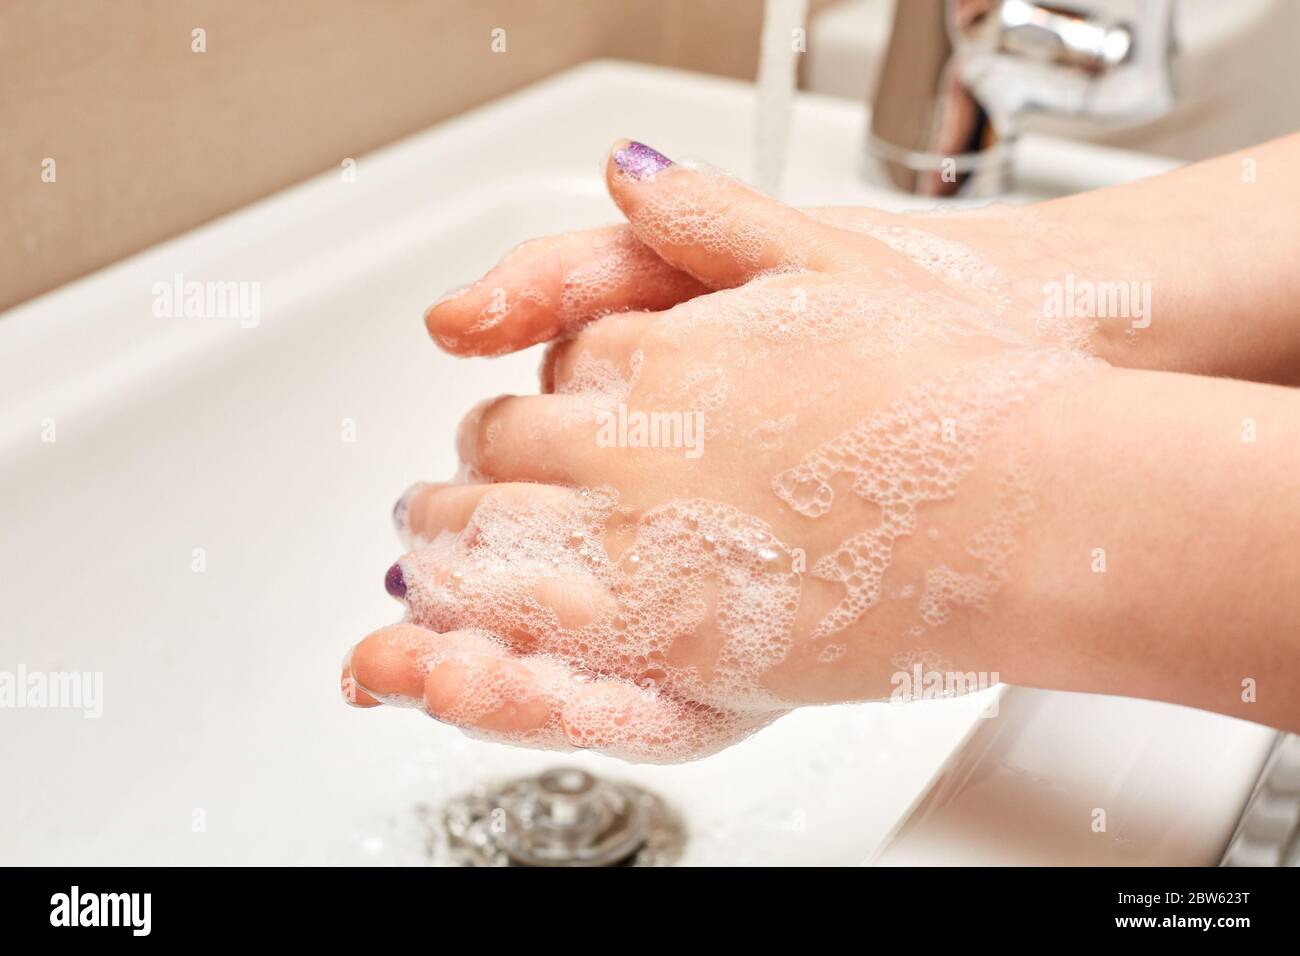 White Child Washing Hands with Soap and Running Water over Sink Stock Photo